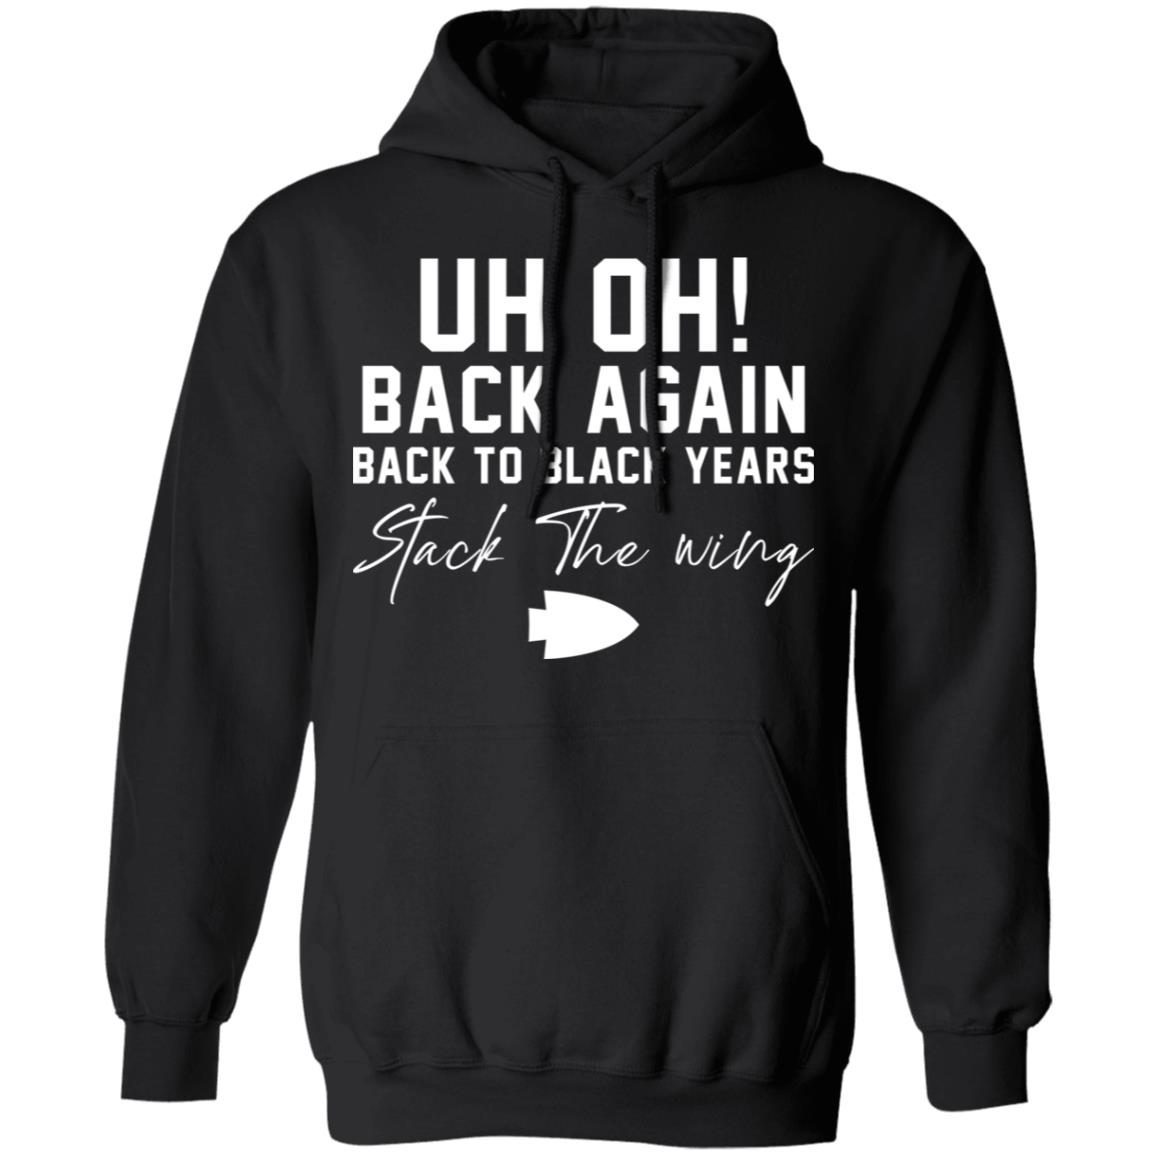 Uh oh back again back to black years stack the wing shirt 3